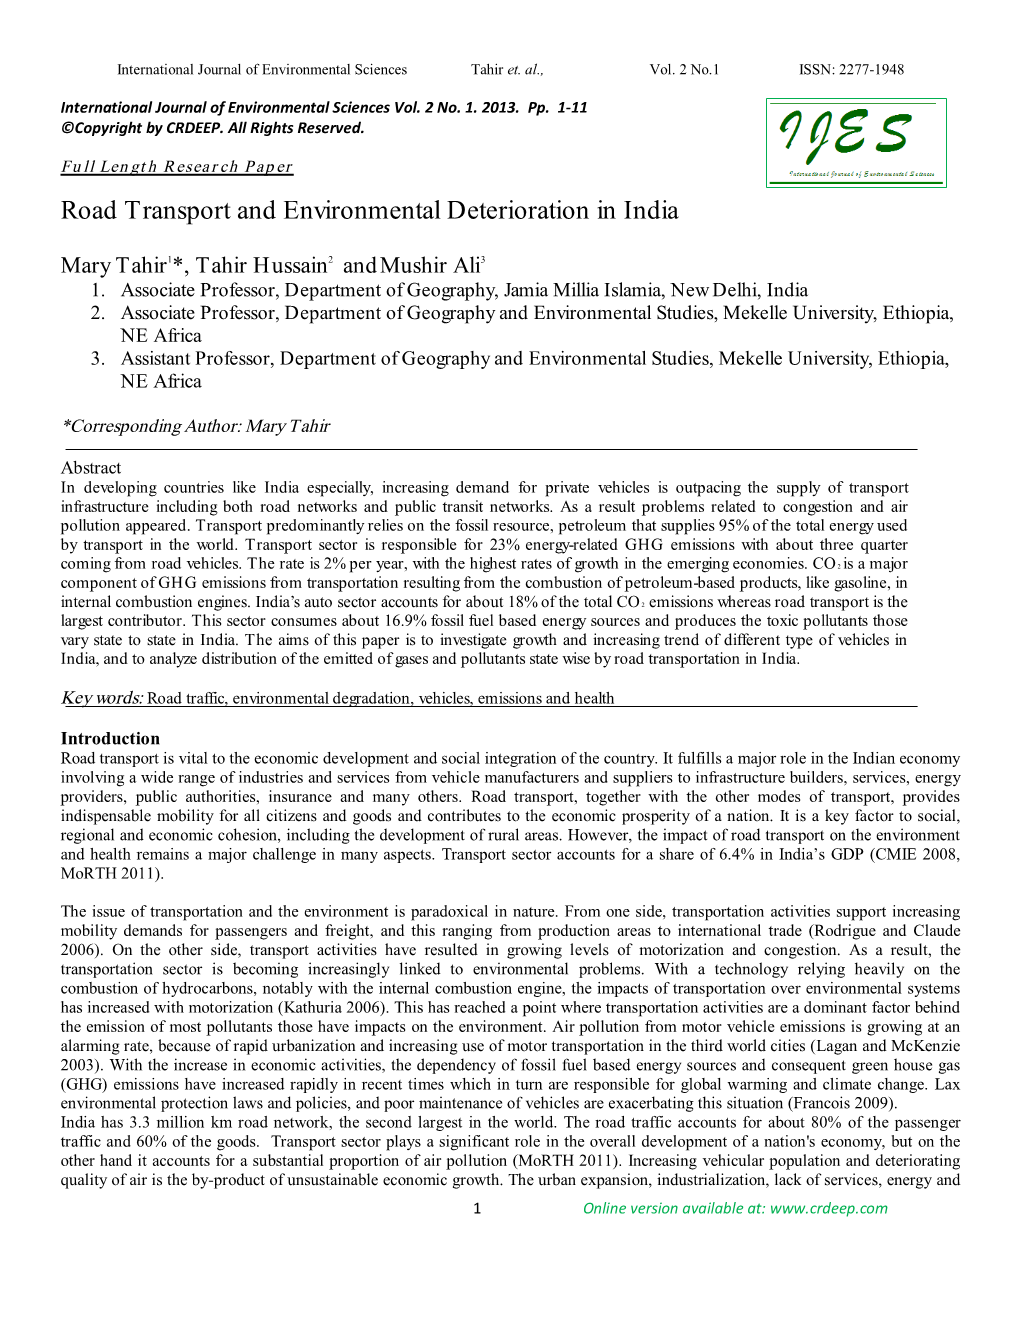 Road Transport and Environmental Deterioration in India